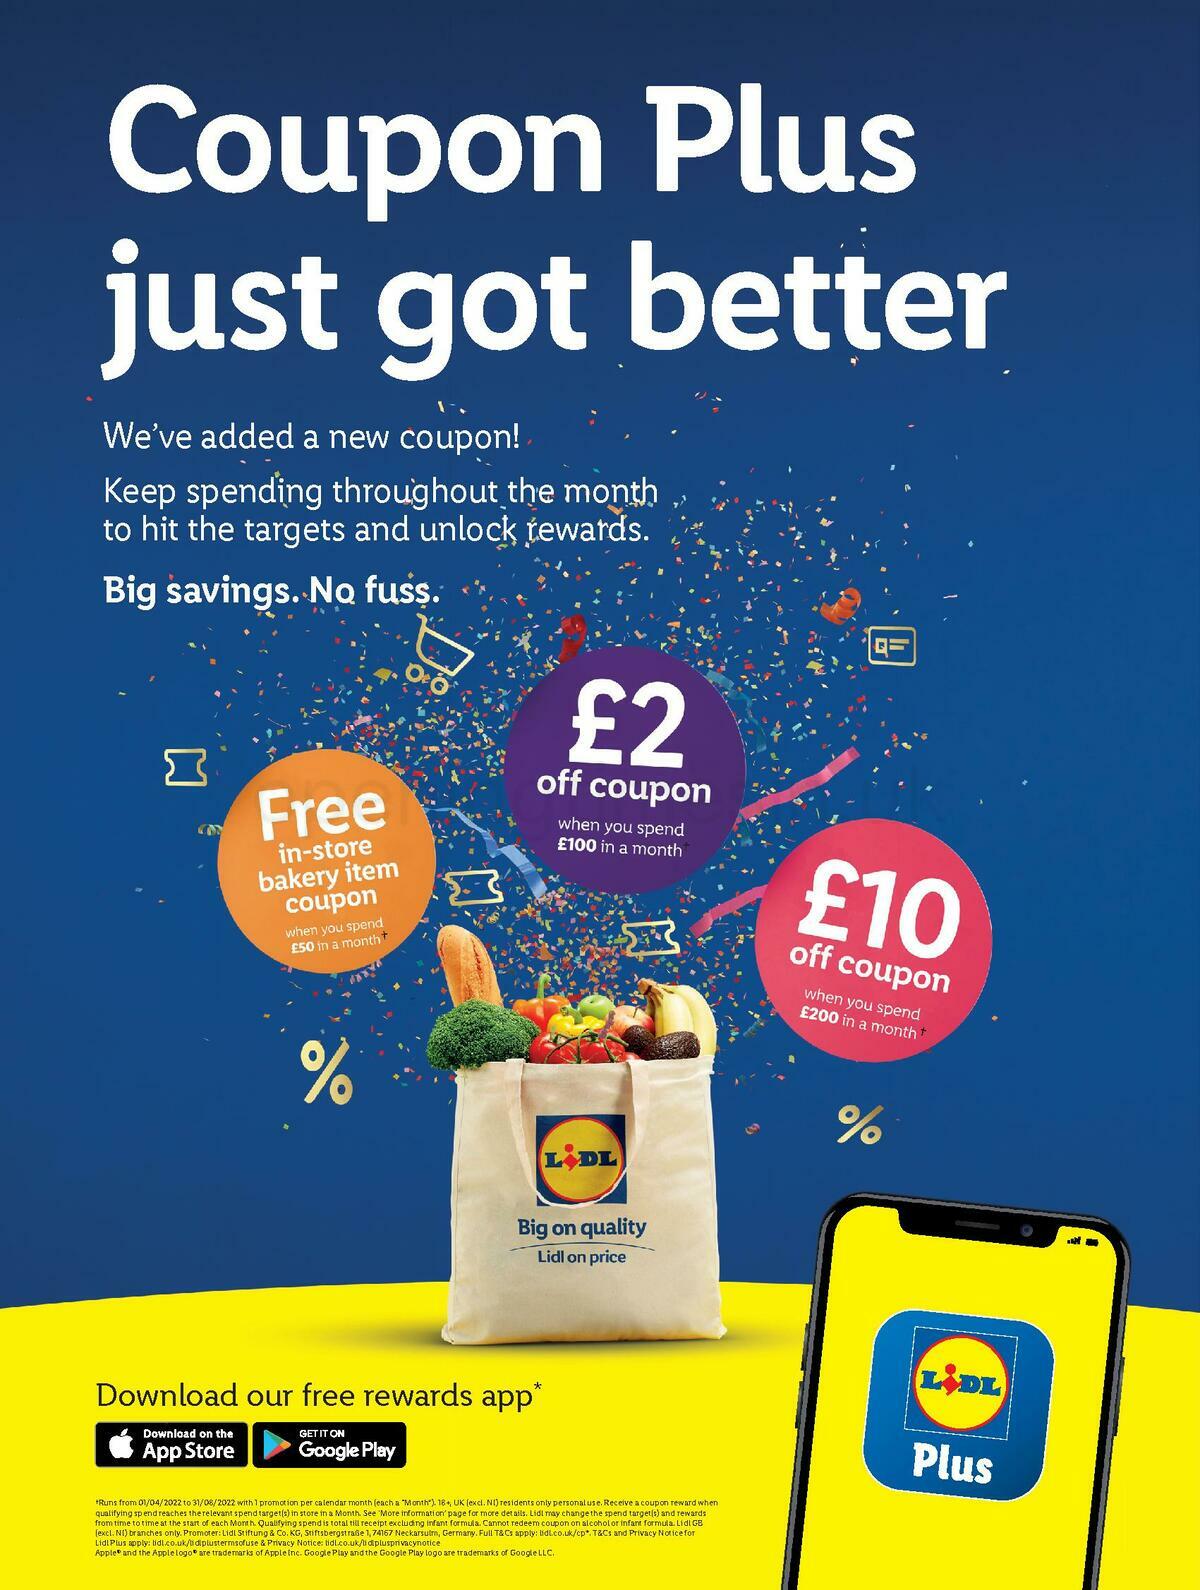 LIDL Offers from 7 July